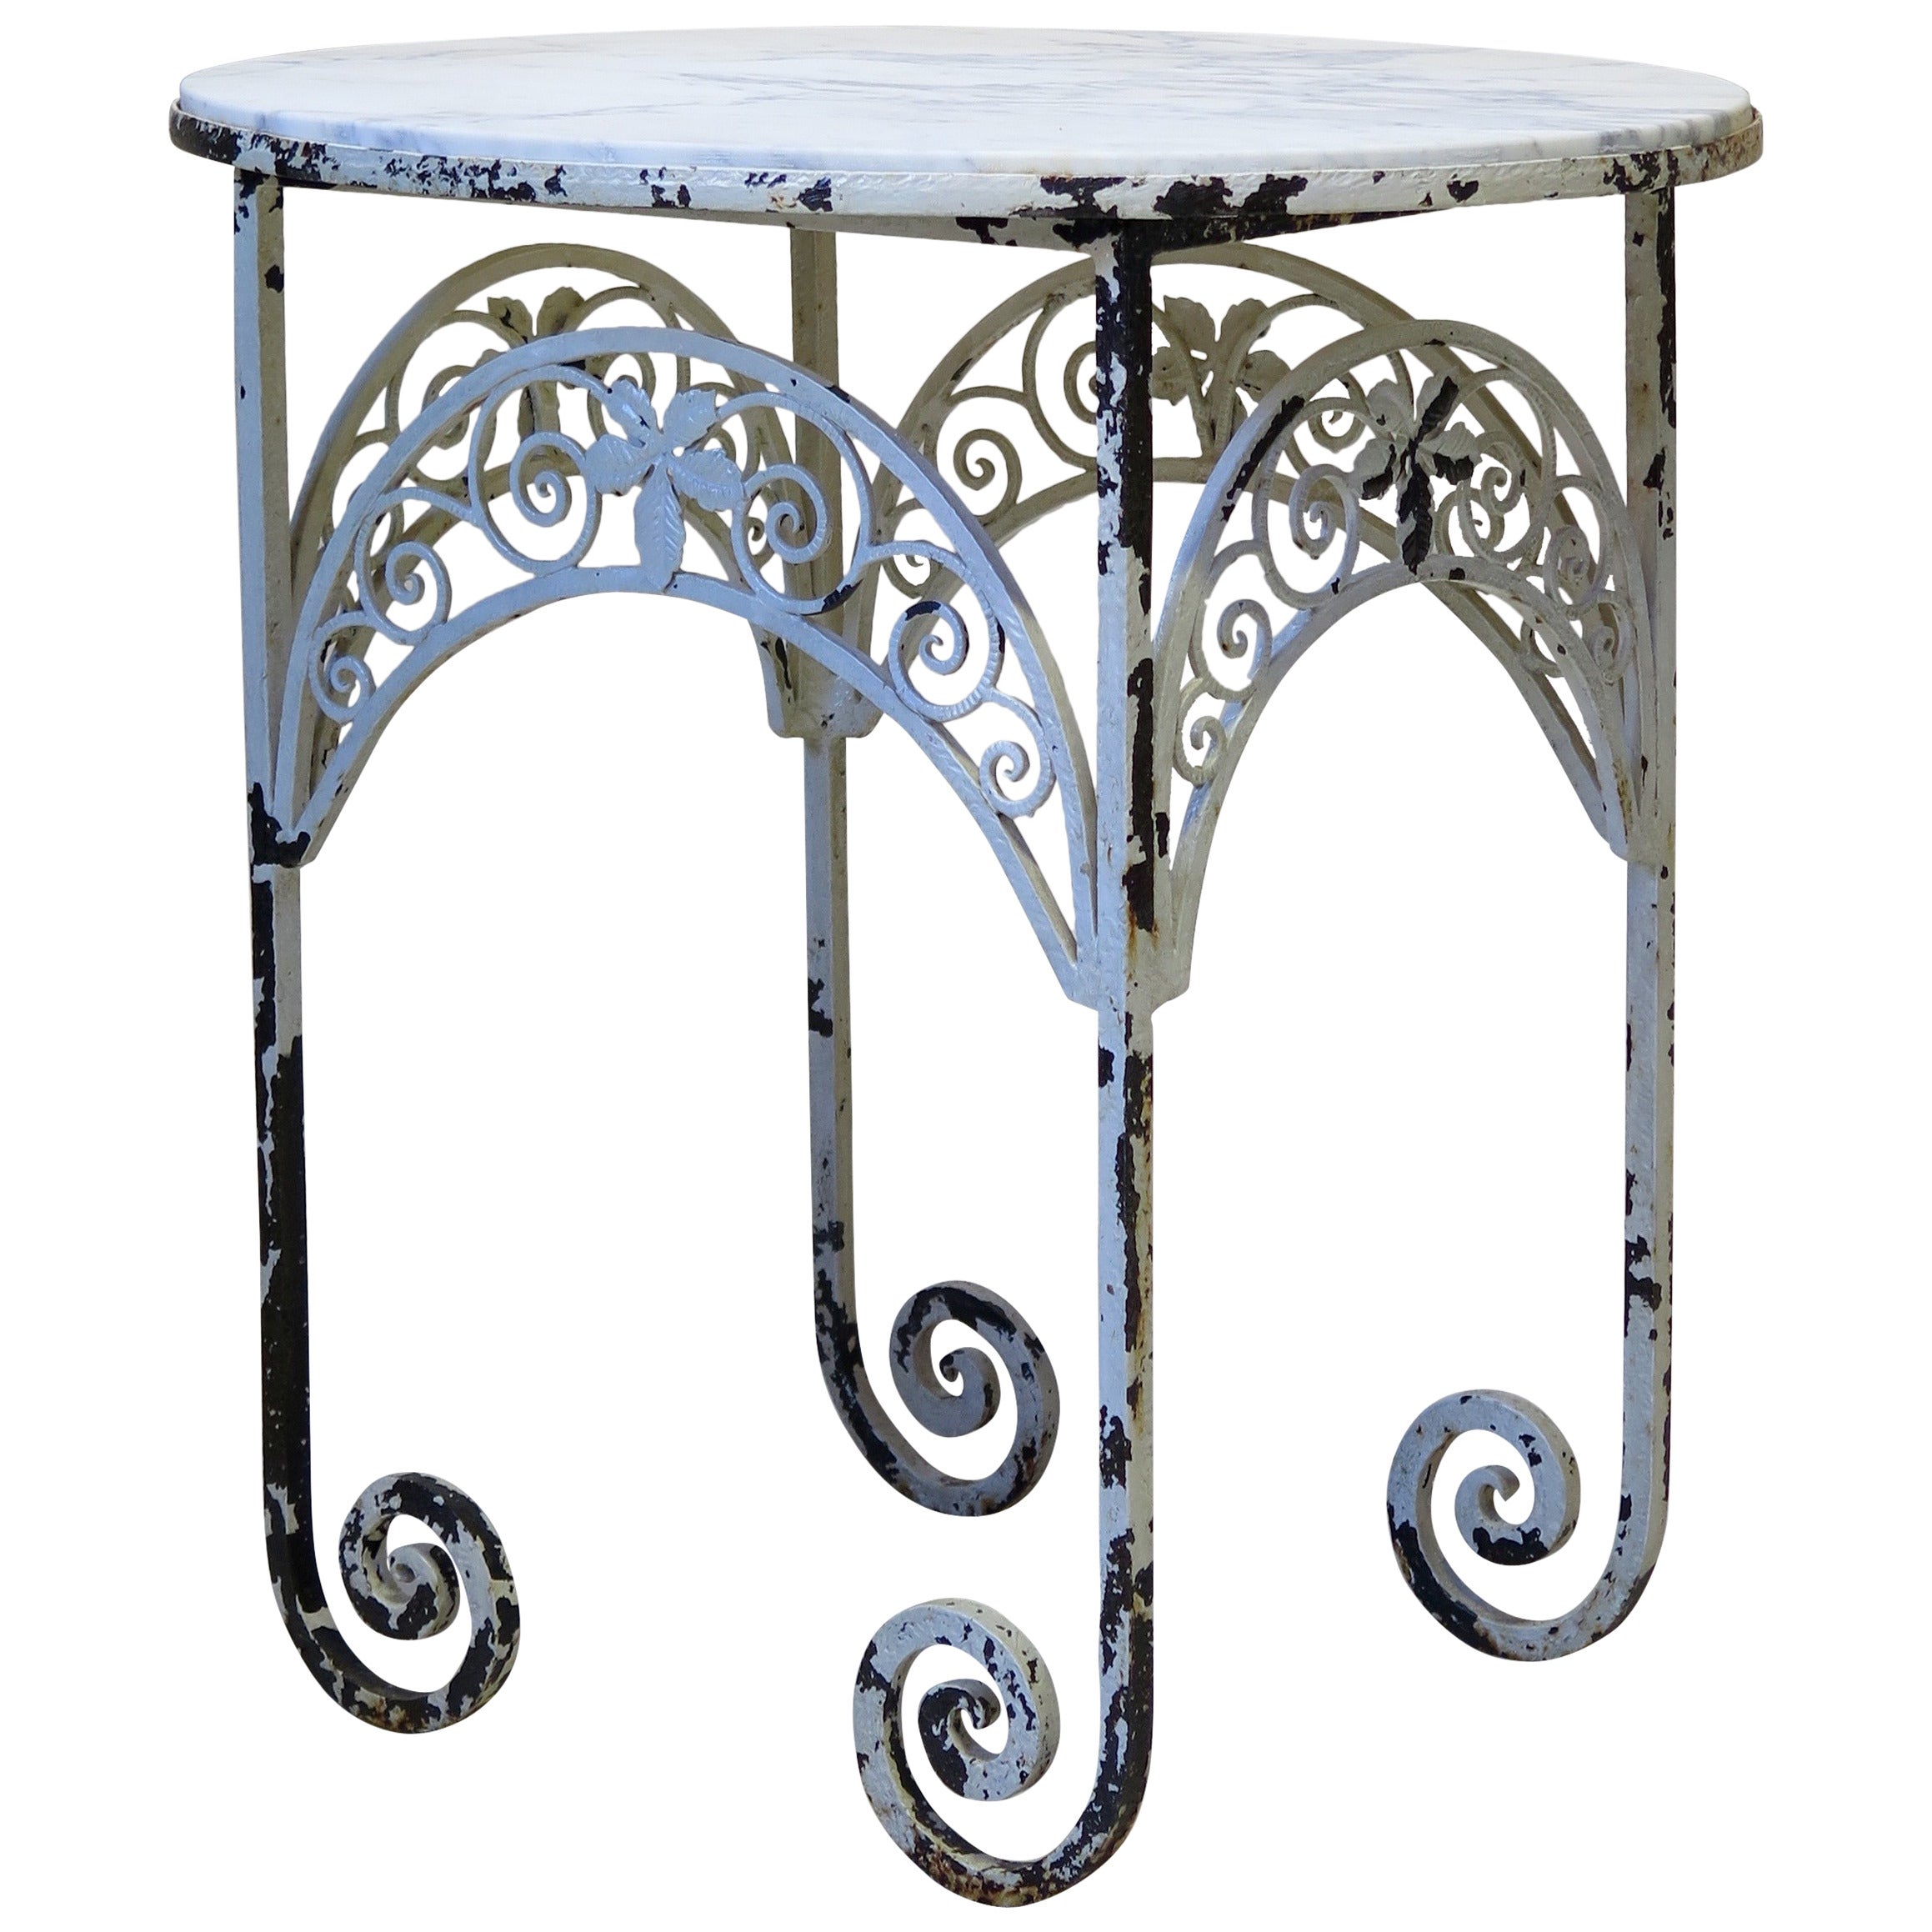 Oval Art Deco Wrought Iron and Marble Side Table, France, circa 1920s